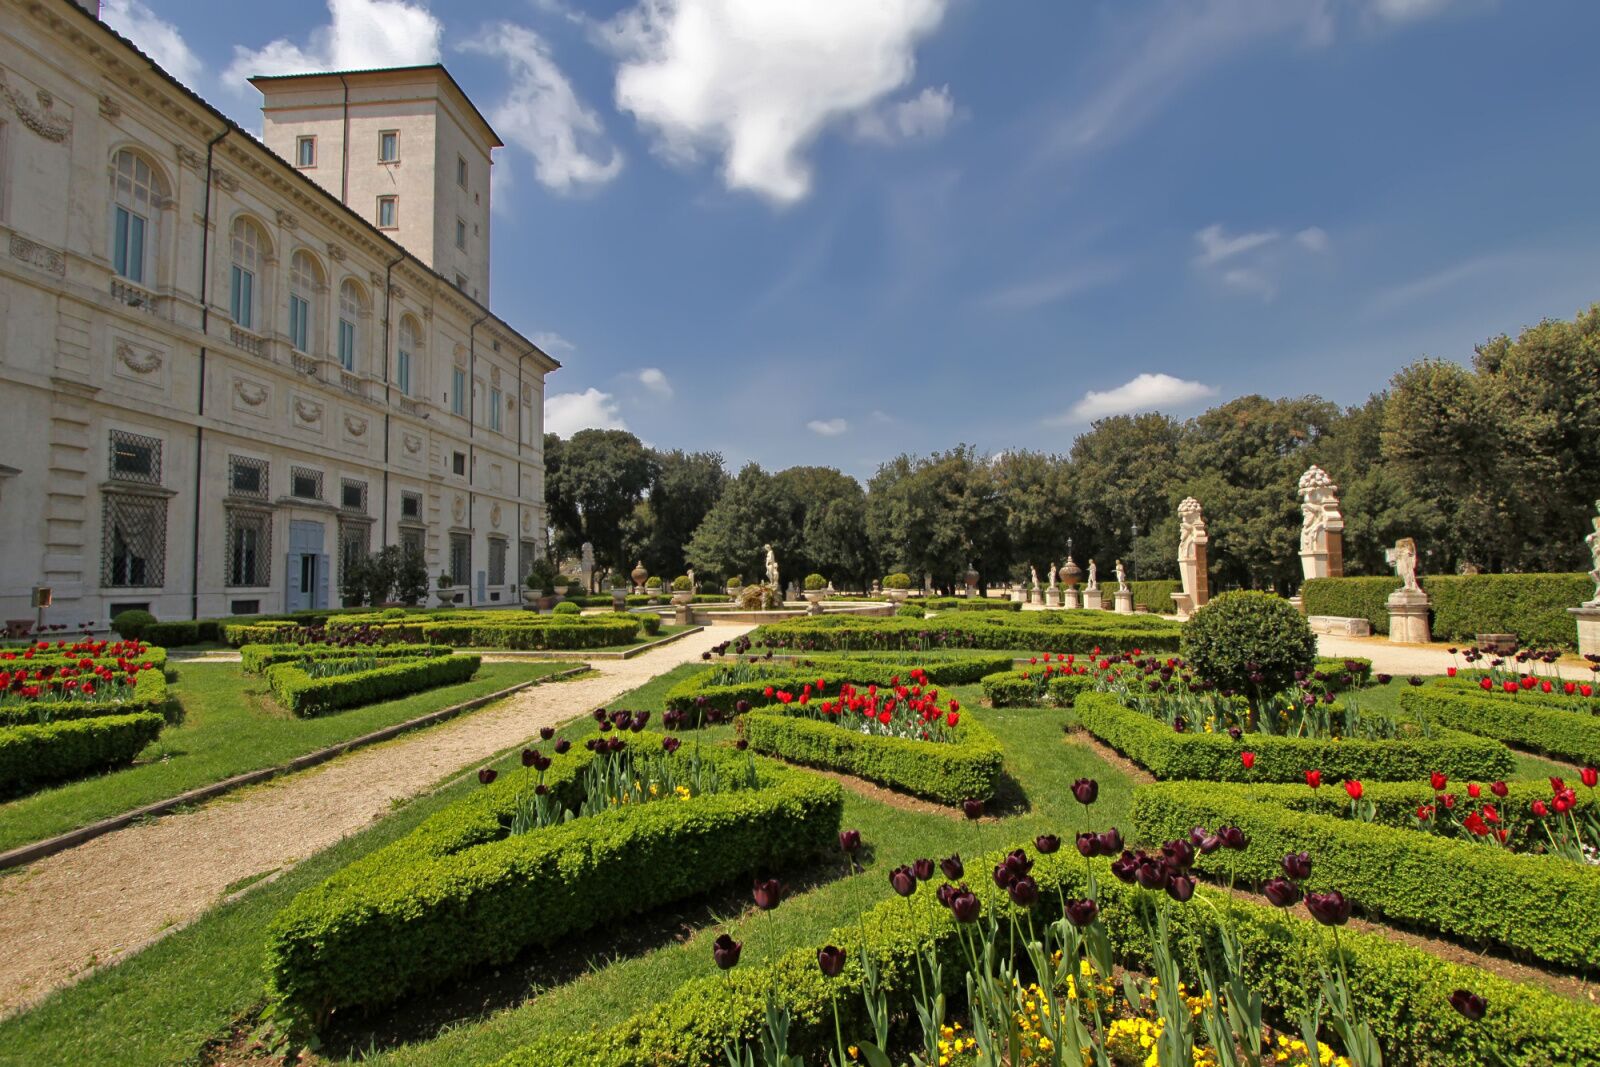 villa borghese, the largest of the parks in rome 